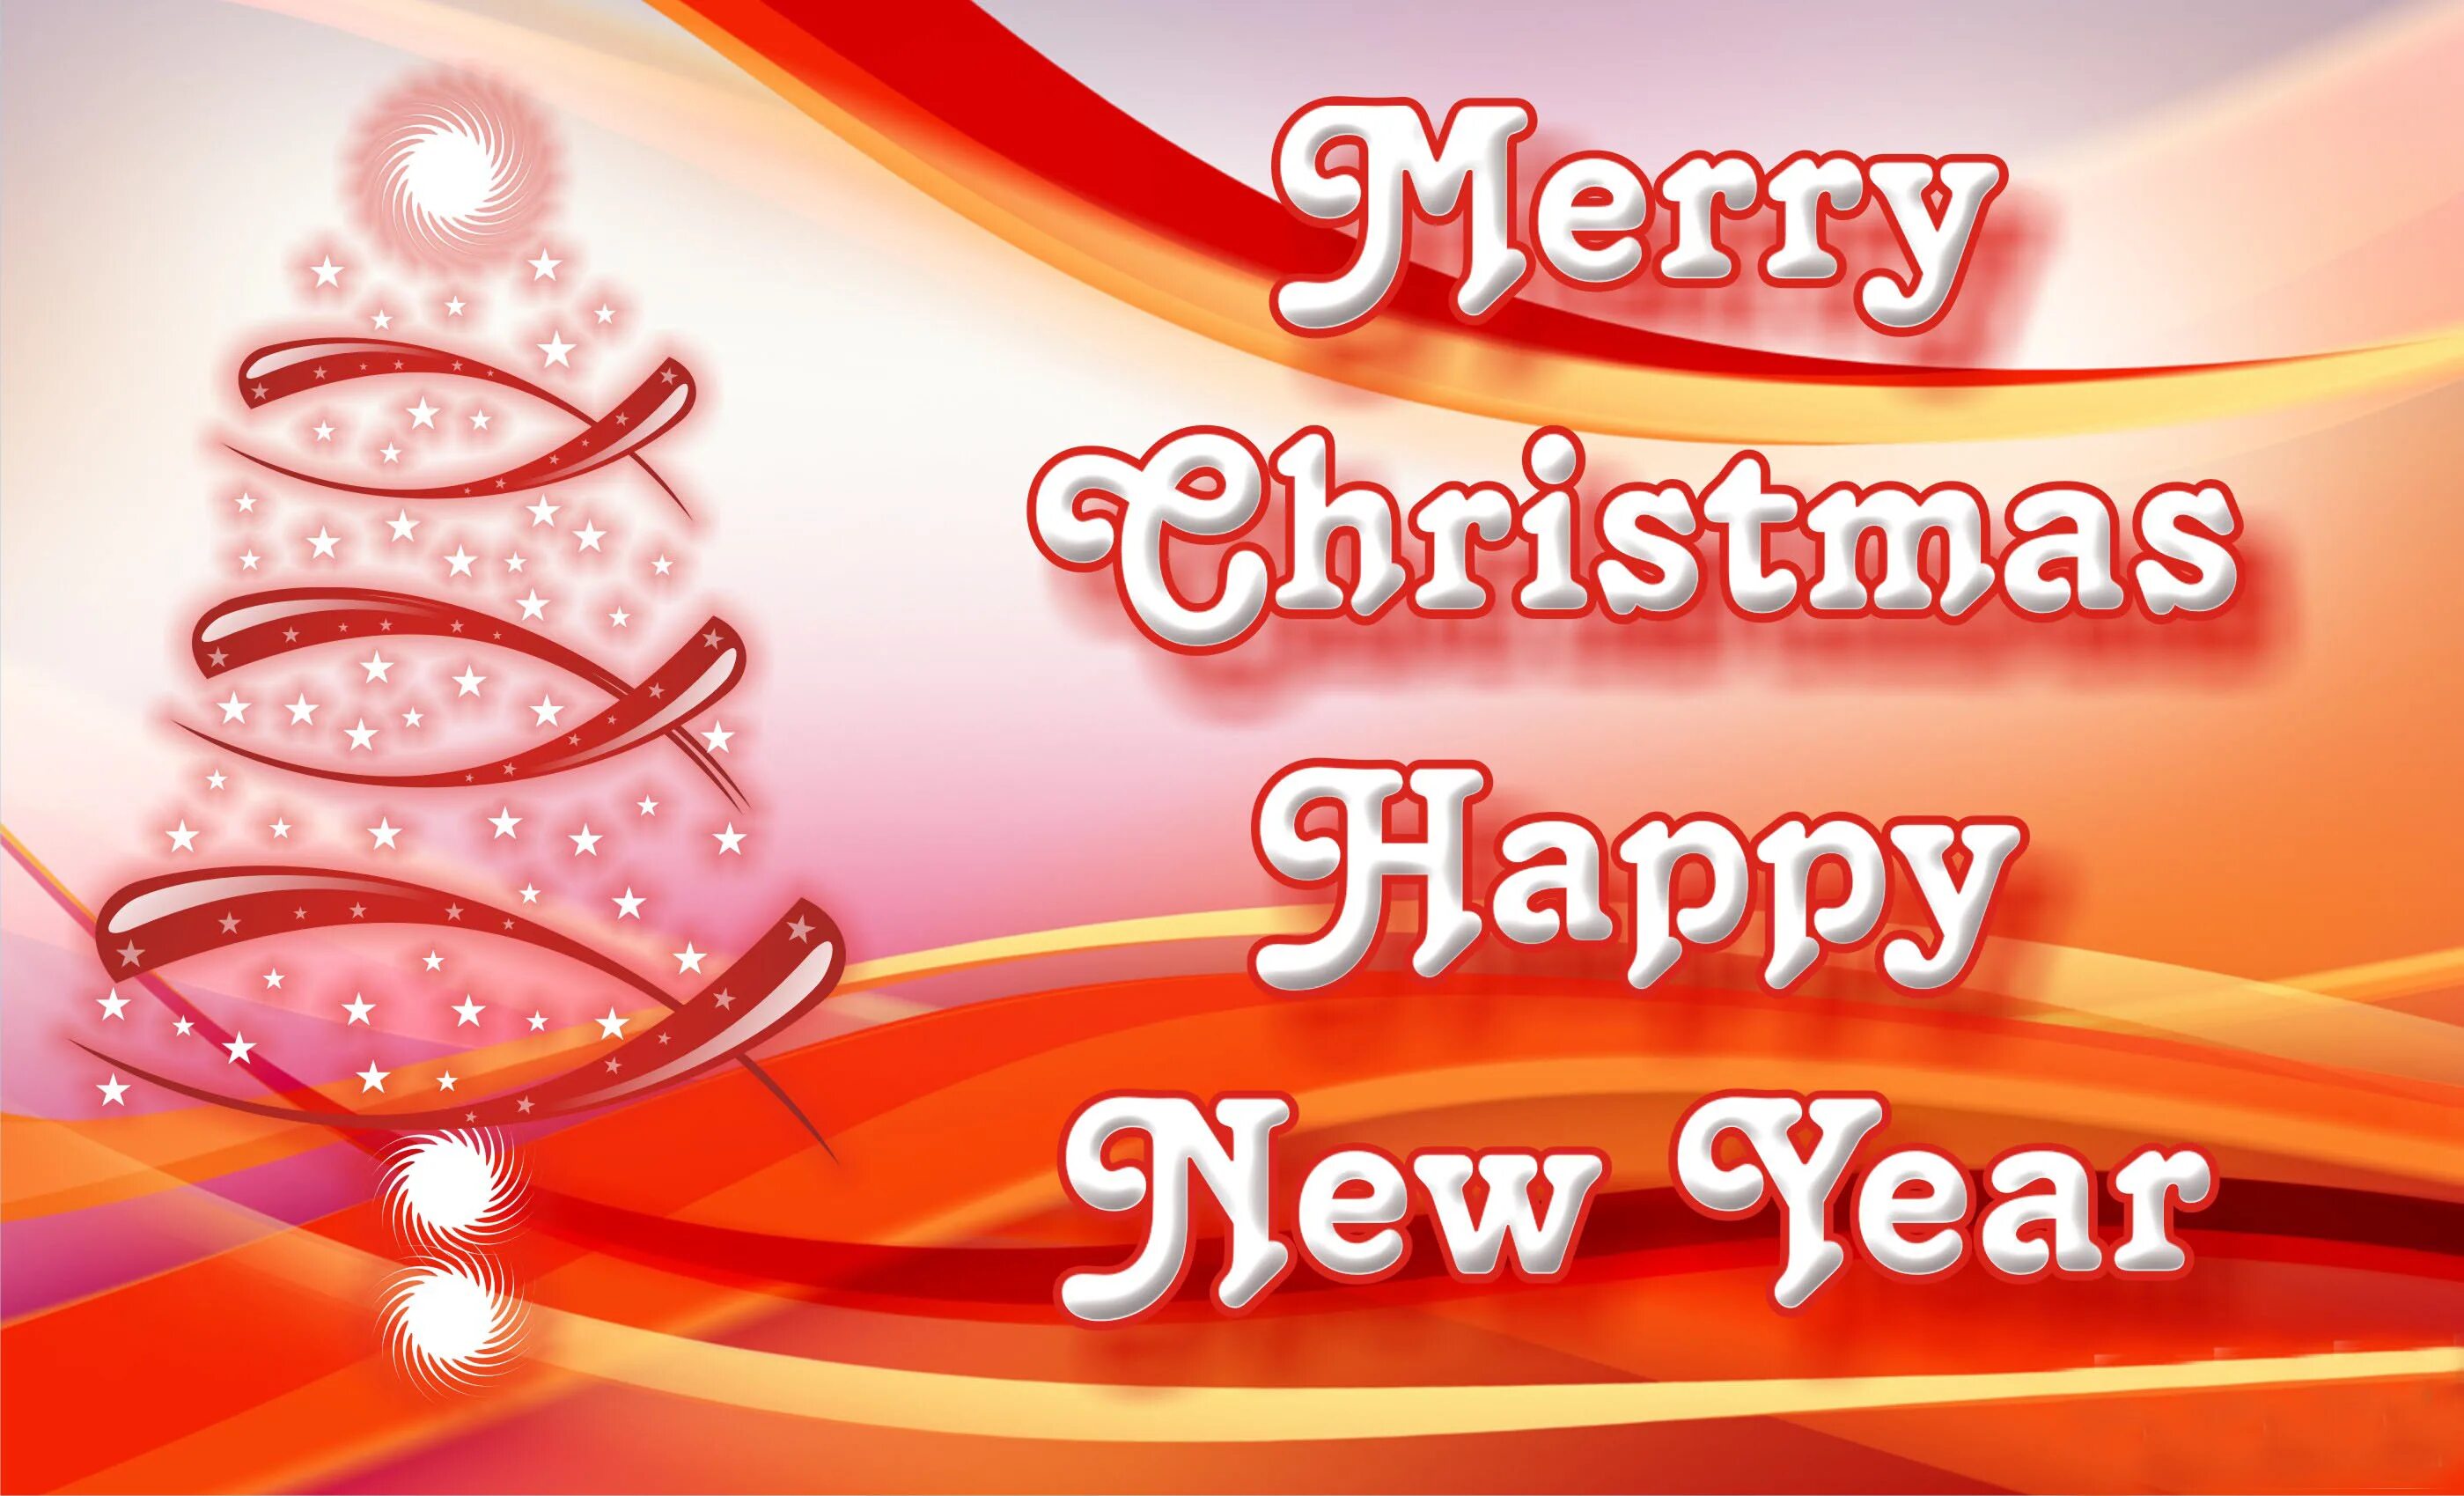 Happy new year be happy. Merry Christmas and Happy New year. Merry Happy. Cheerfuls Life. Football Happy New 2023 year.